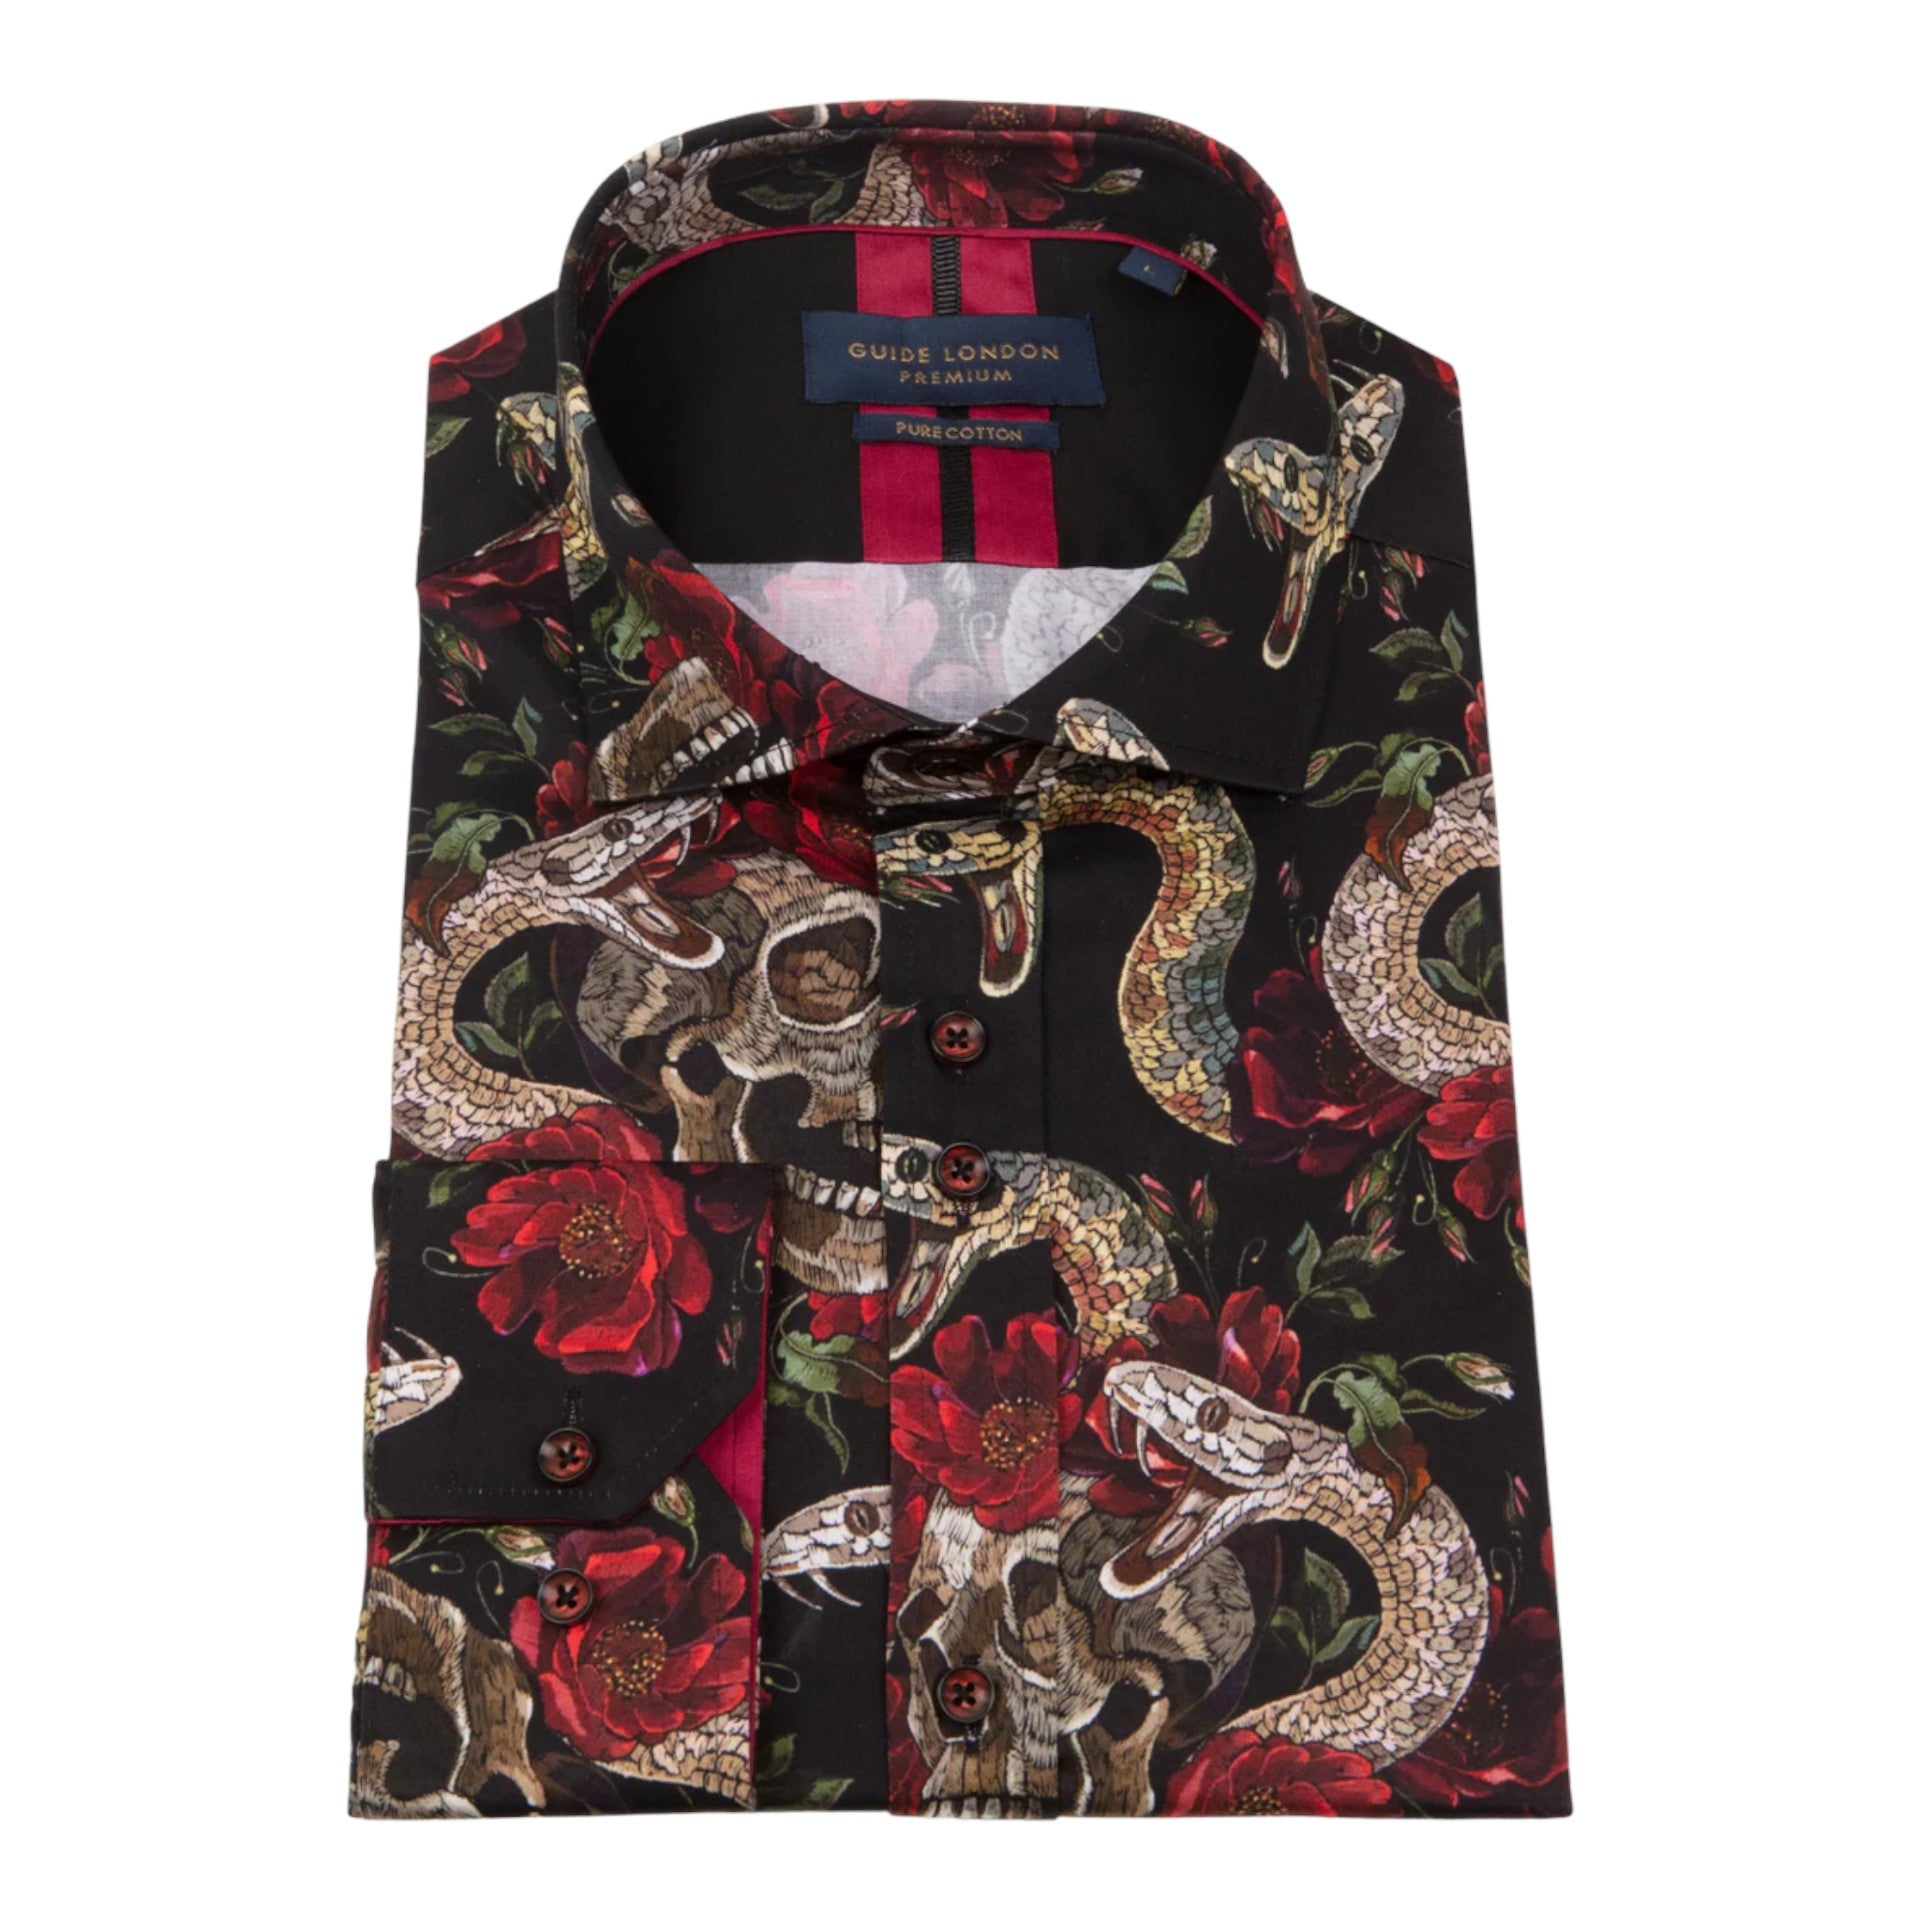 Guide London LS76740 Red Edgy Skull,Roses, and Snake Print Long Sleeve Shirt